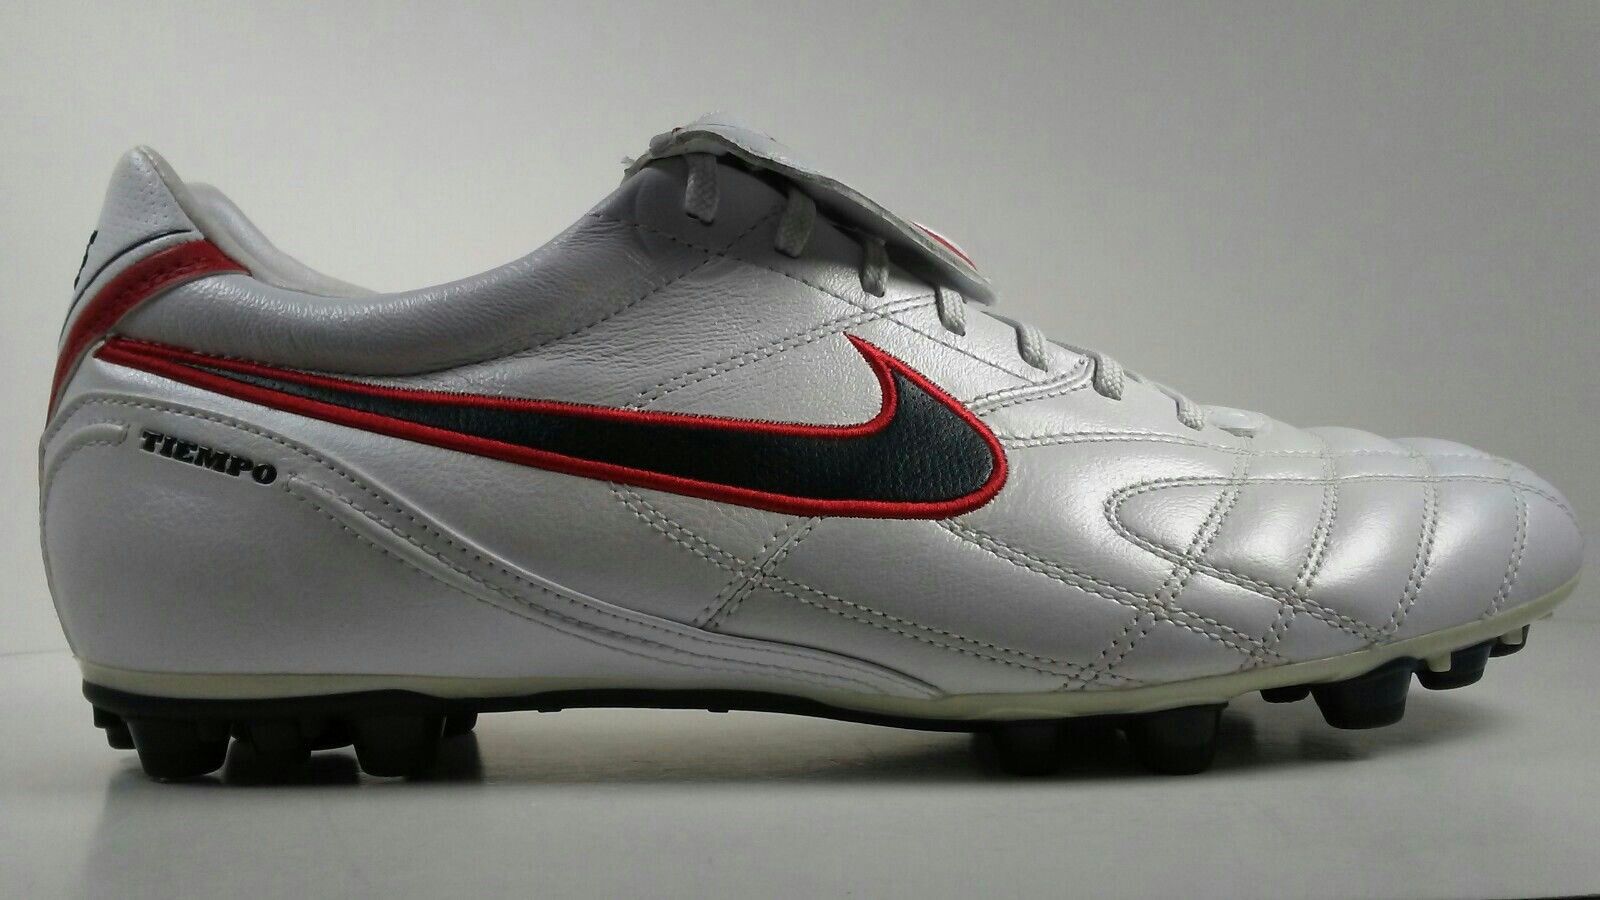 Rare!!! 2010 NIKE TIEMPO MYSTIC III AG Men's Soccer Cleats 366181-136 US Size 12 Size 13 size for Sale in Bakersfield, CA - OfferUp